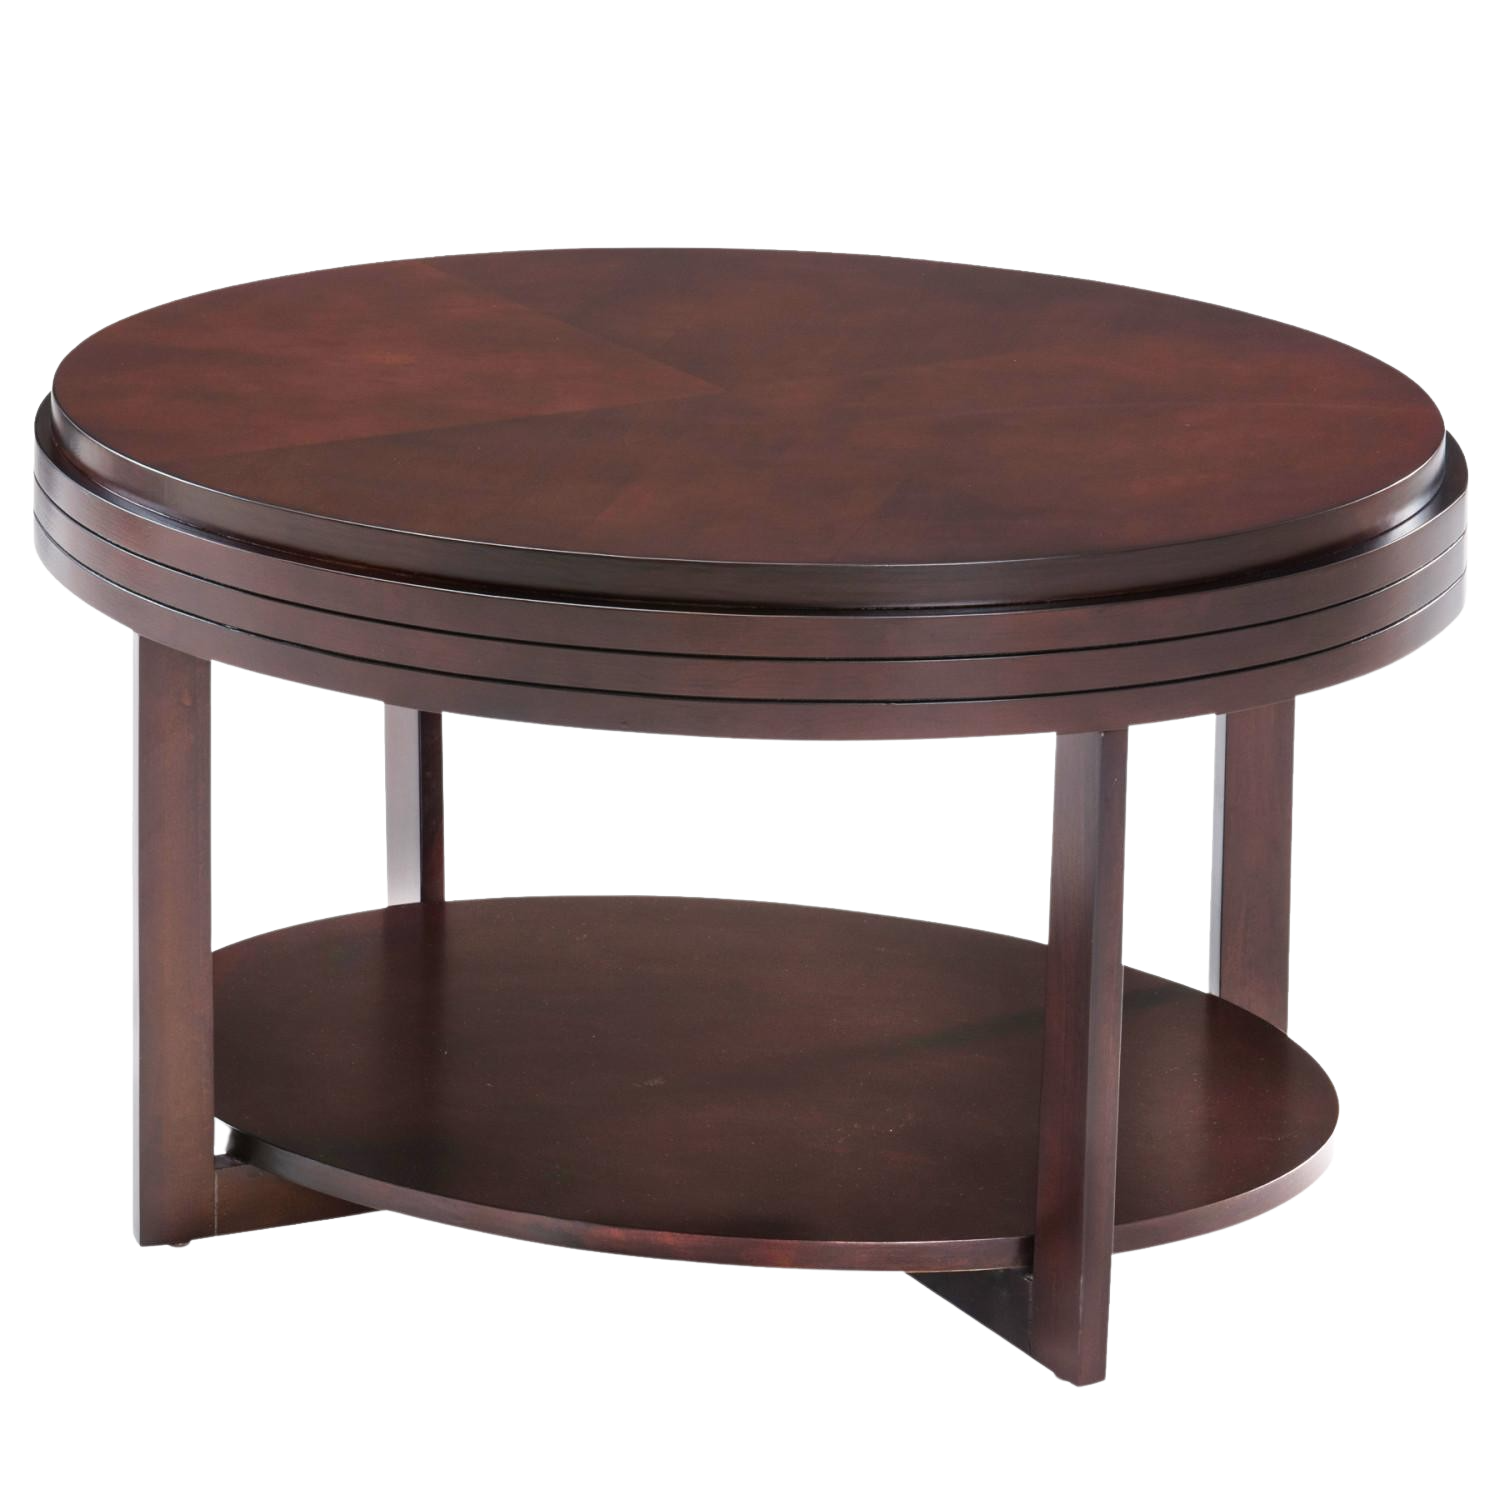 Leick Home, Leick Home 10109-CH Favorite Finds Oval Apartment Coffee Table in Chocolate Cherry New